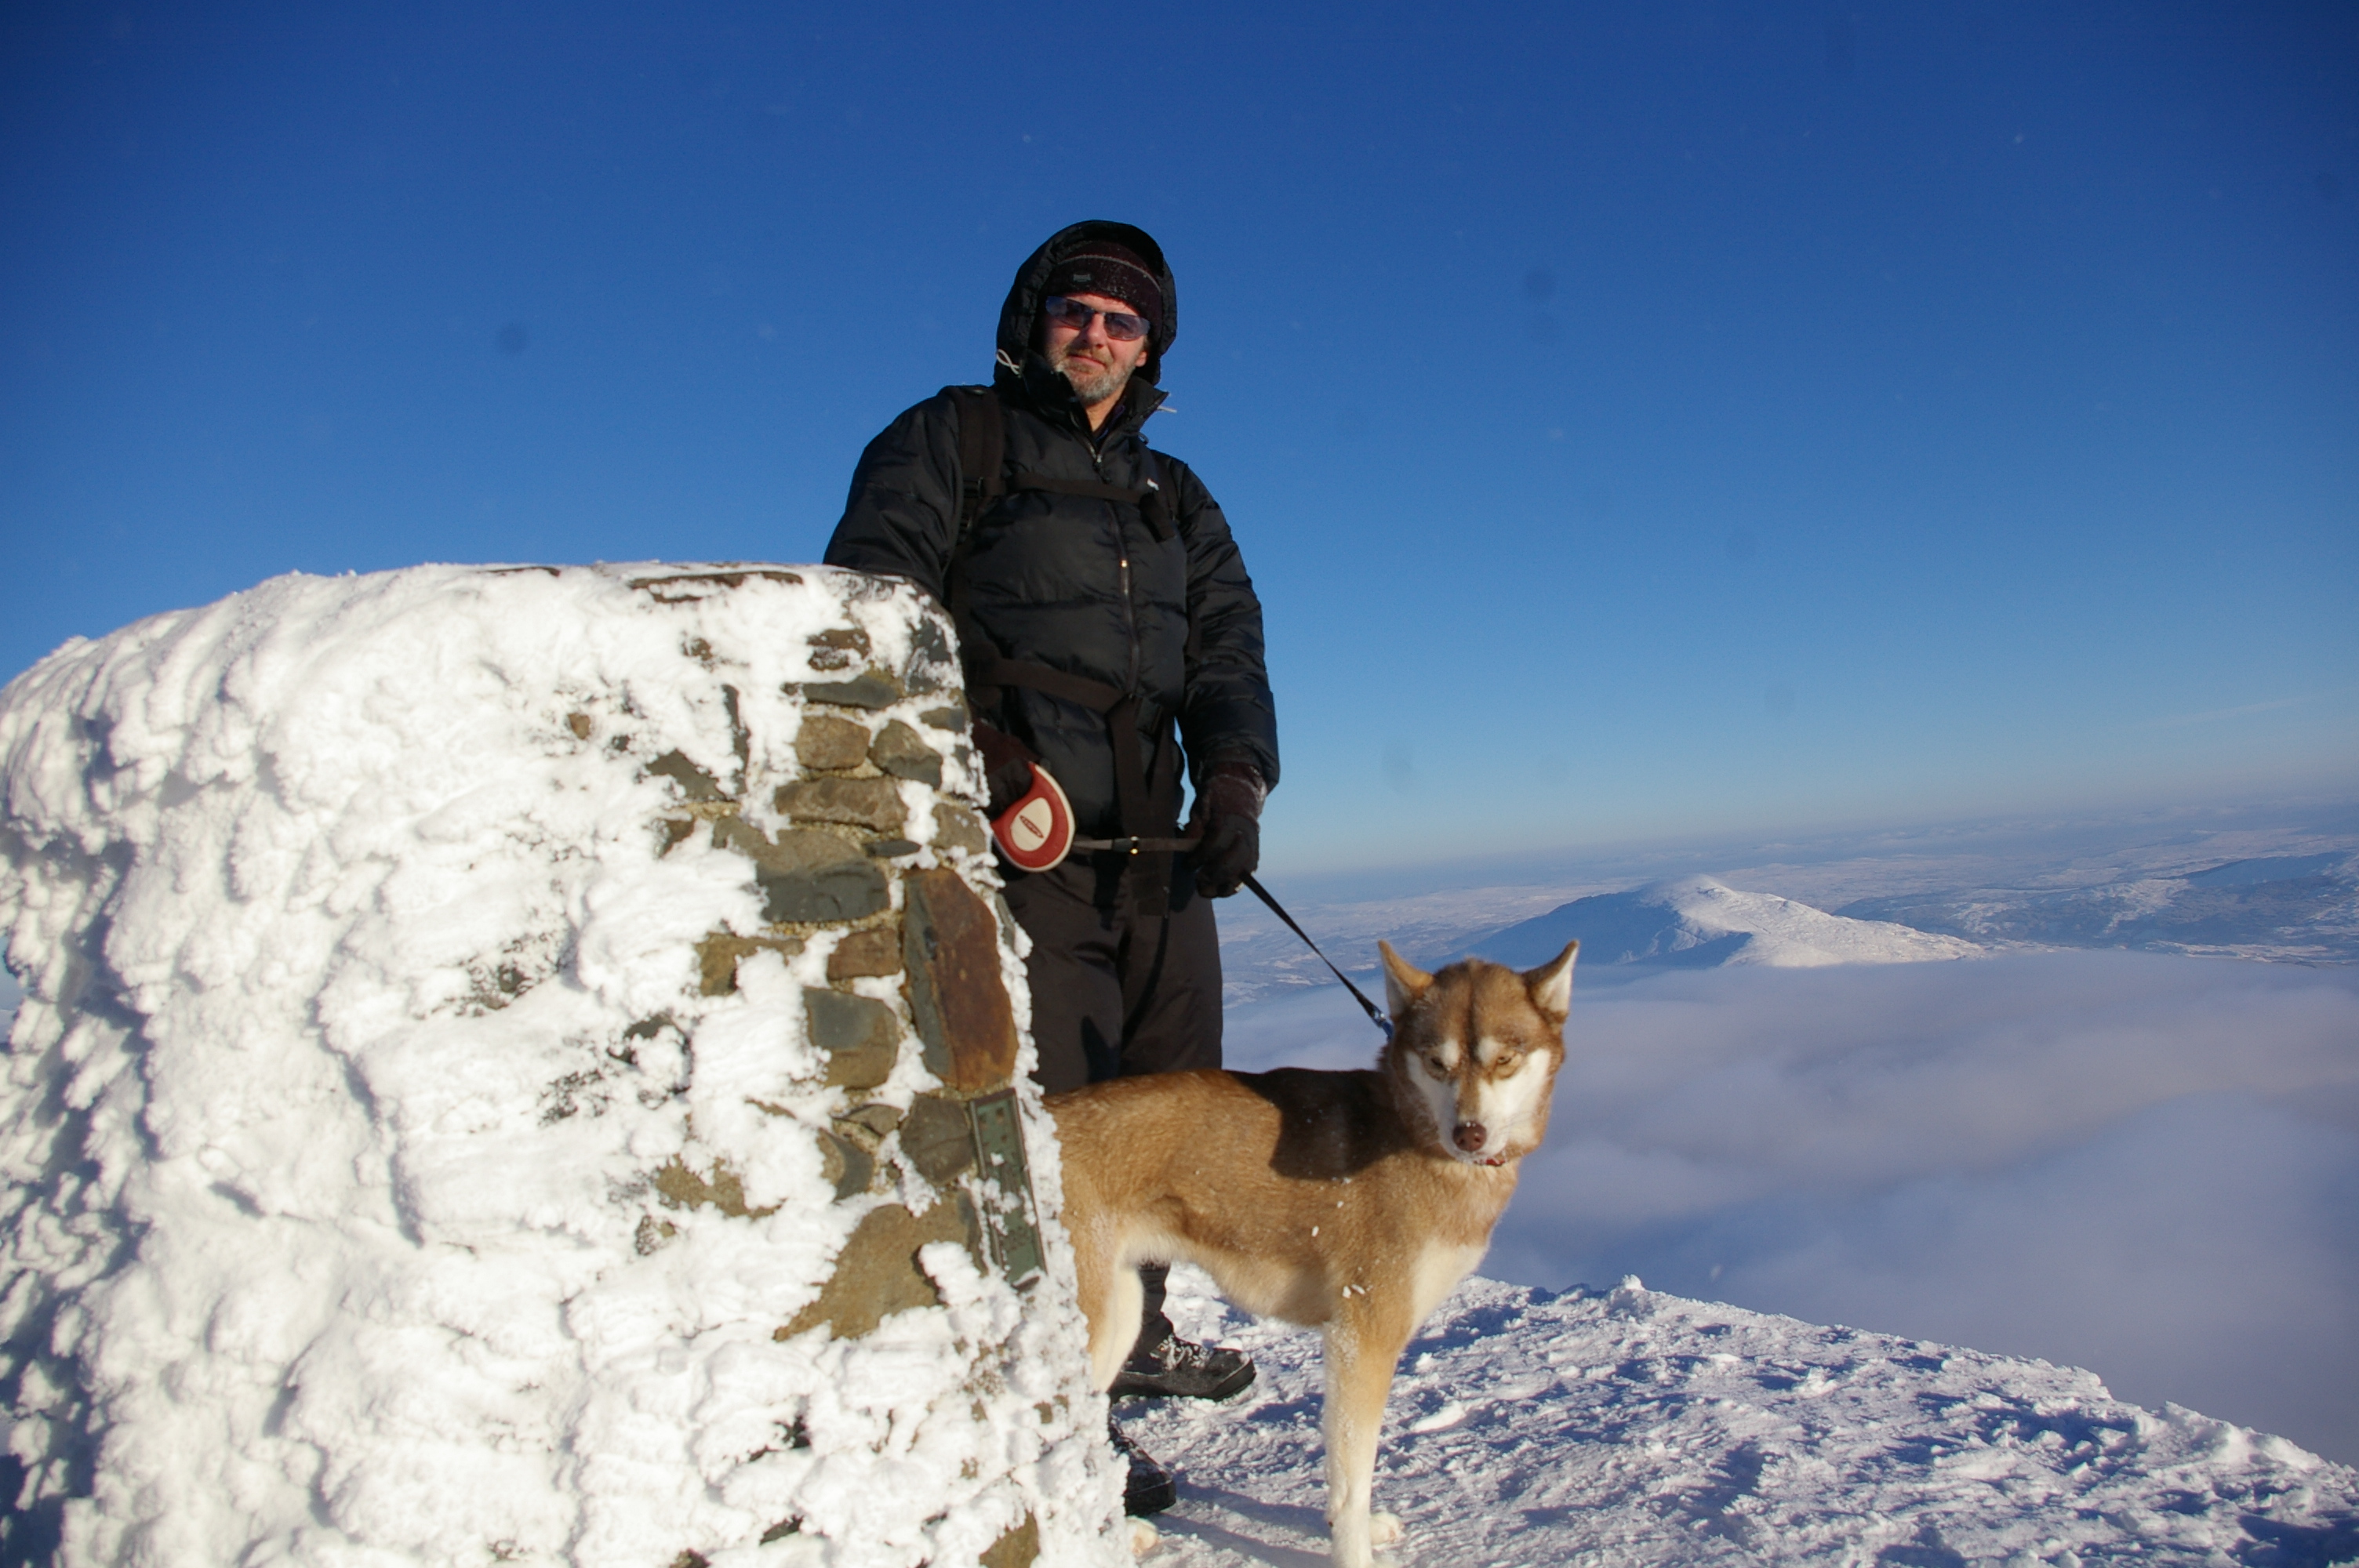 just me and my dog!, Snowdon